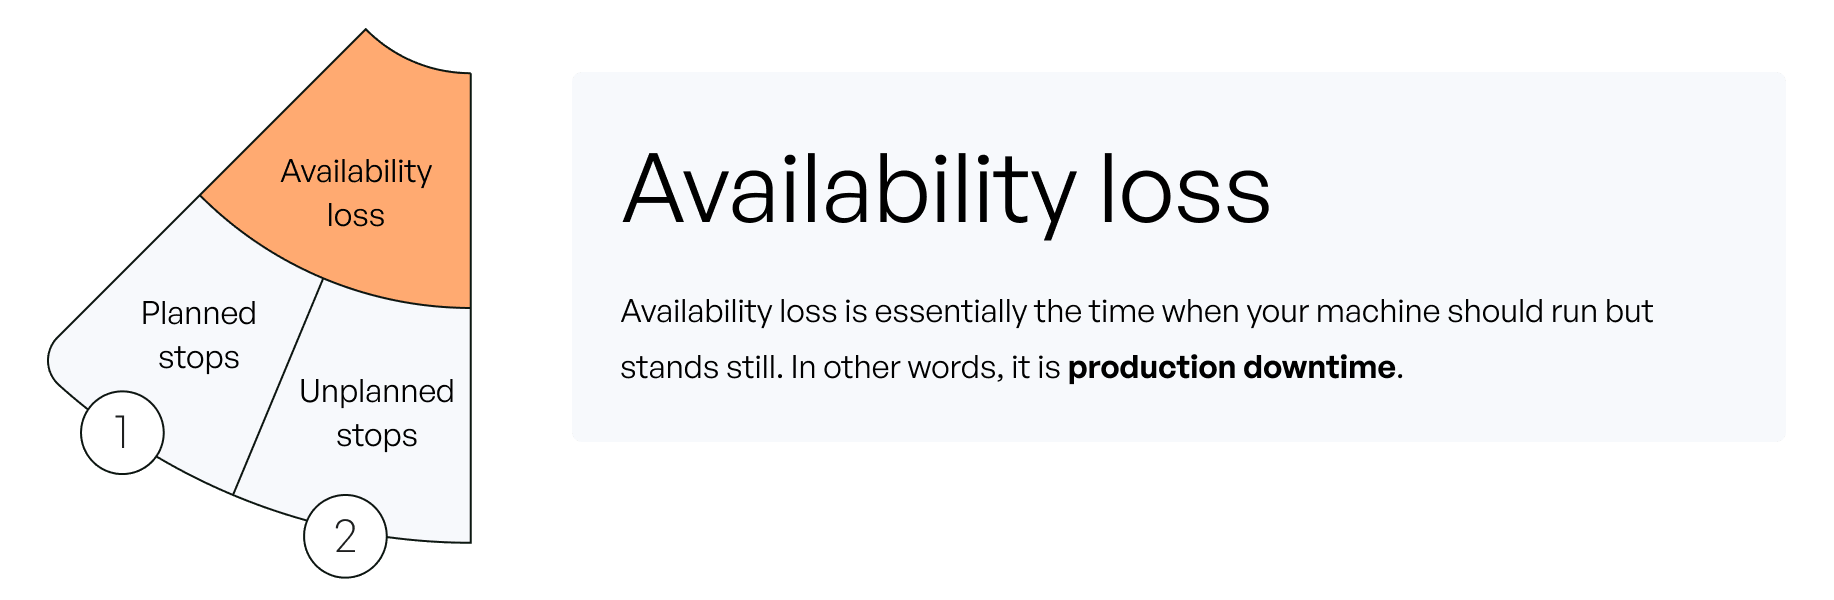 availability loss or production downtime